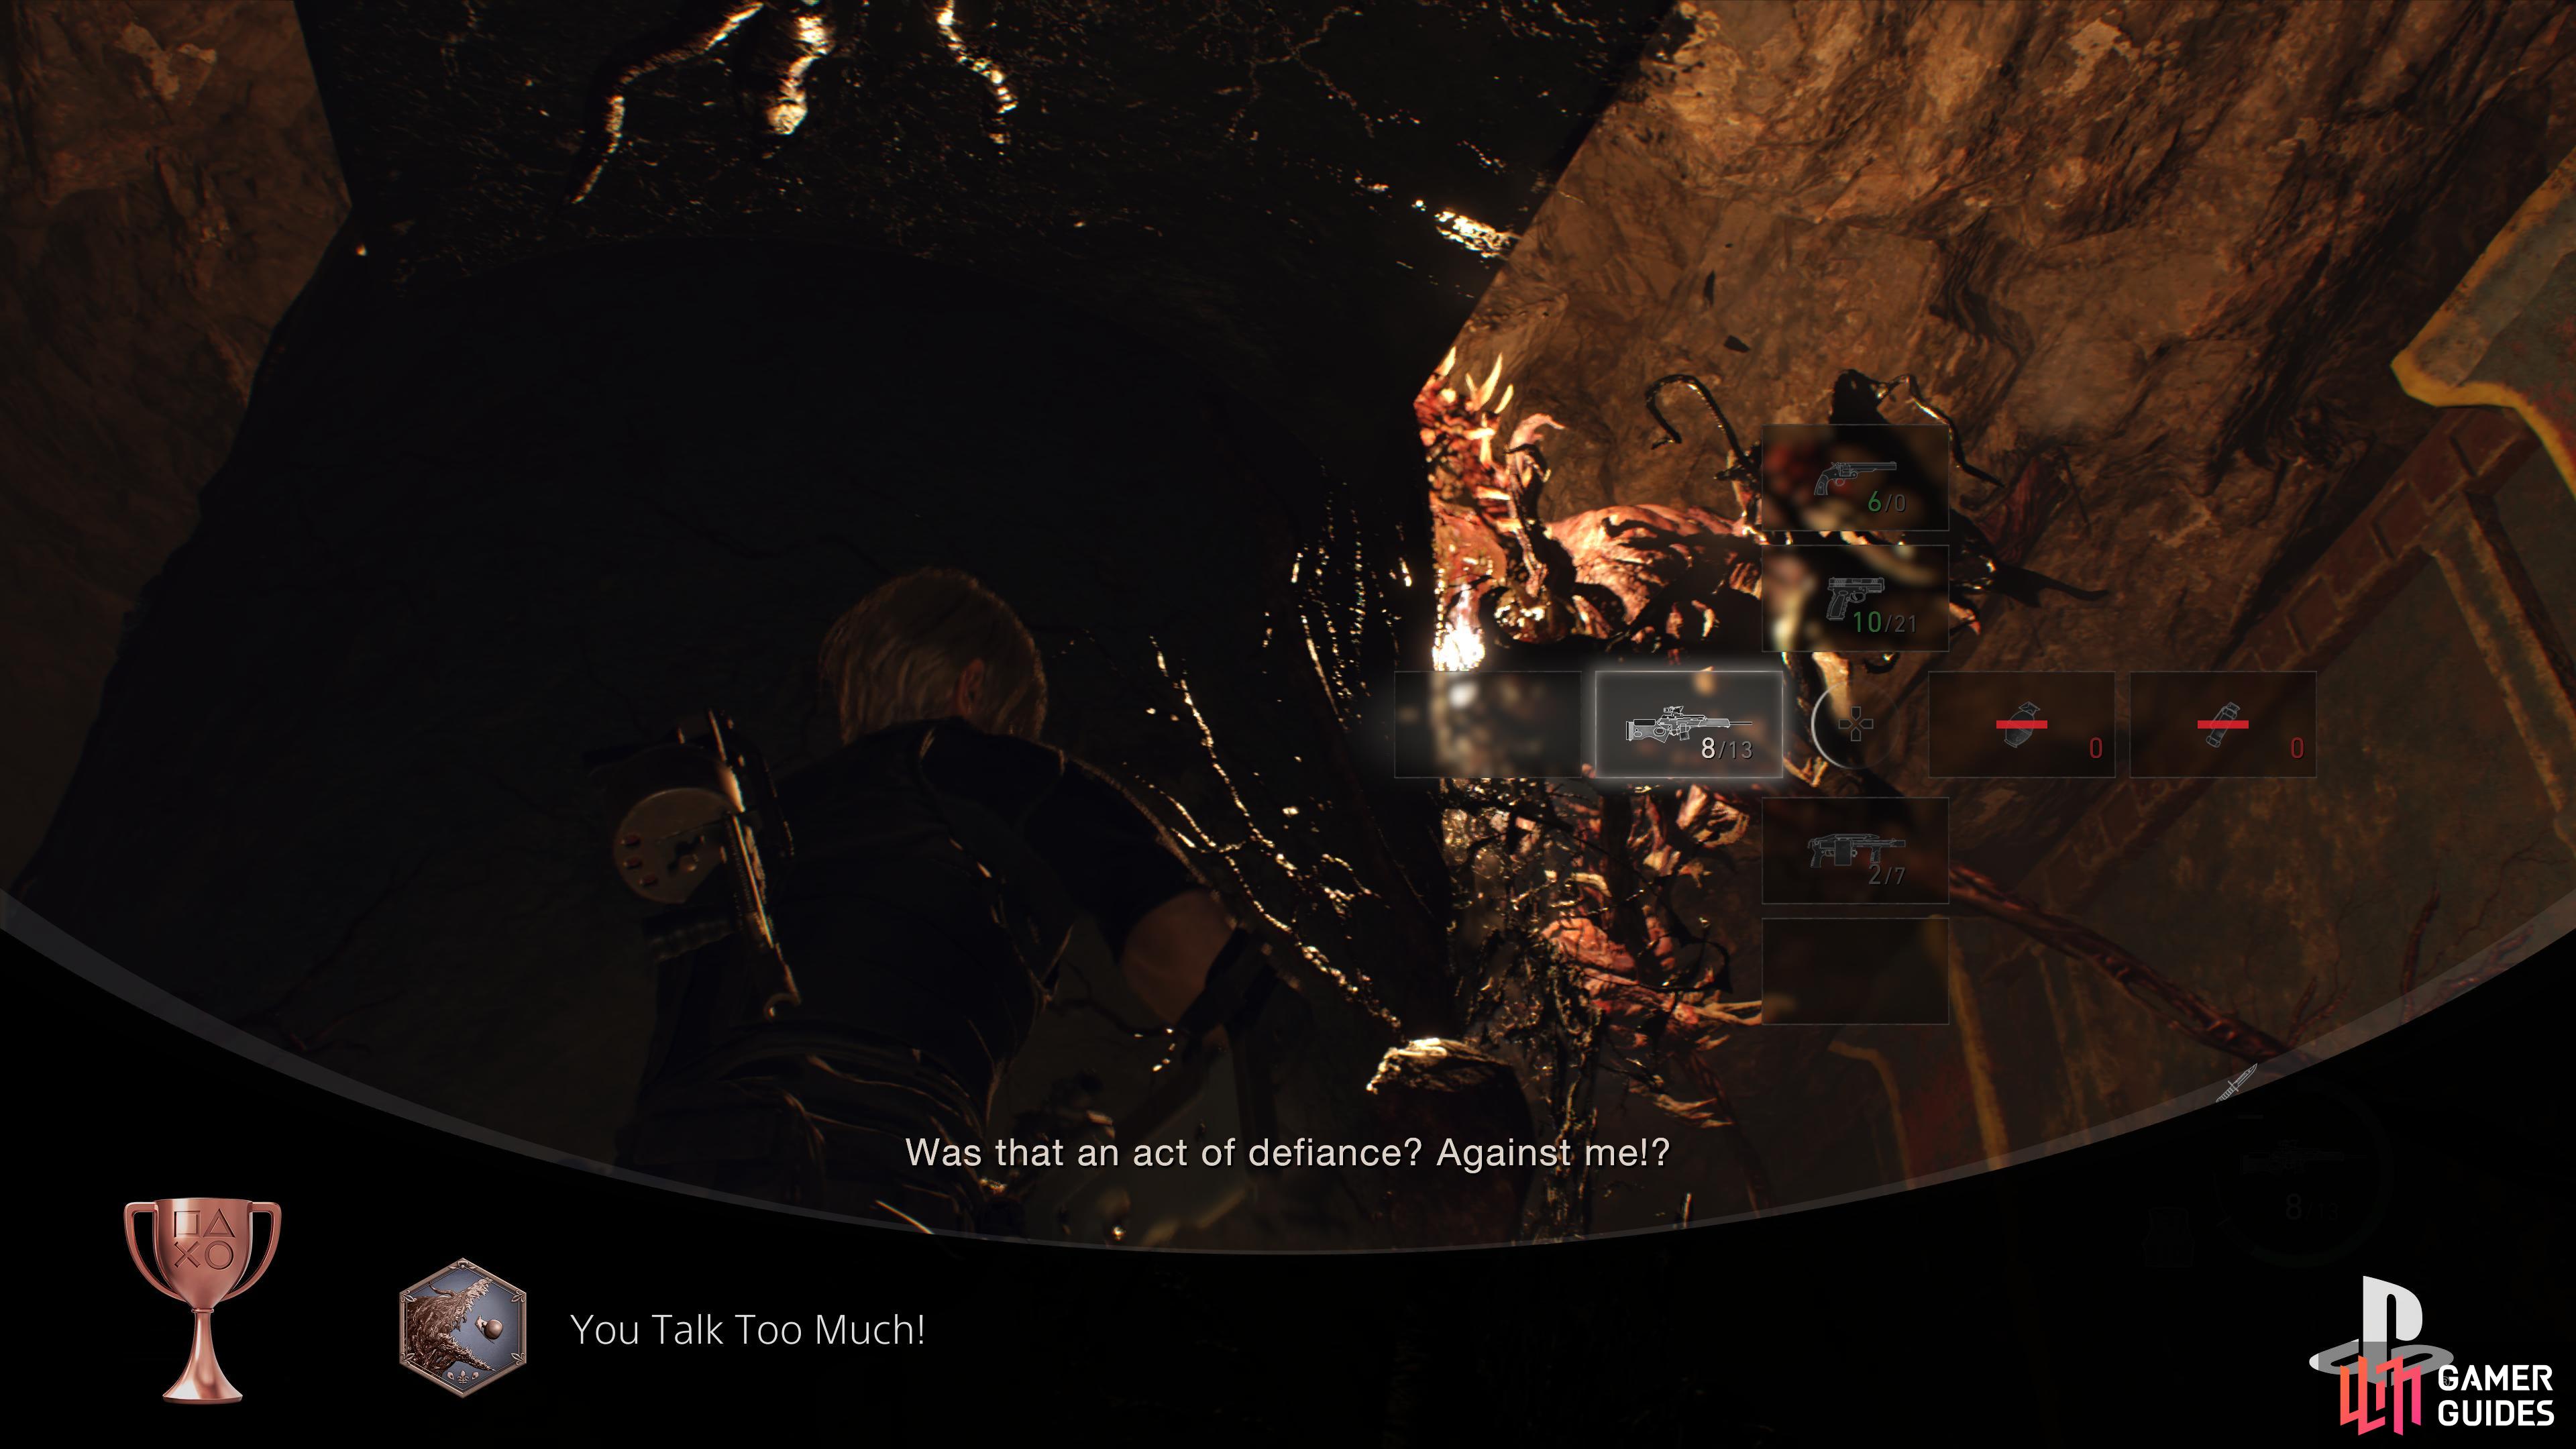 You’ll obtain the  You Talk Too Much  Trophy/Achievement upon successfully throwing a grenade into his mouth.